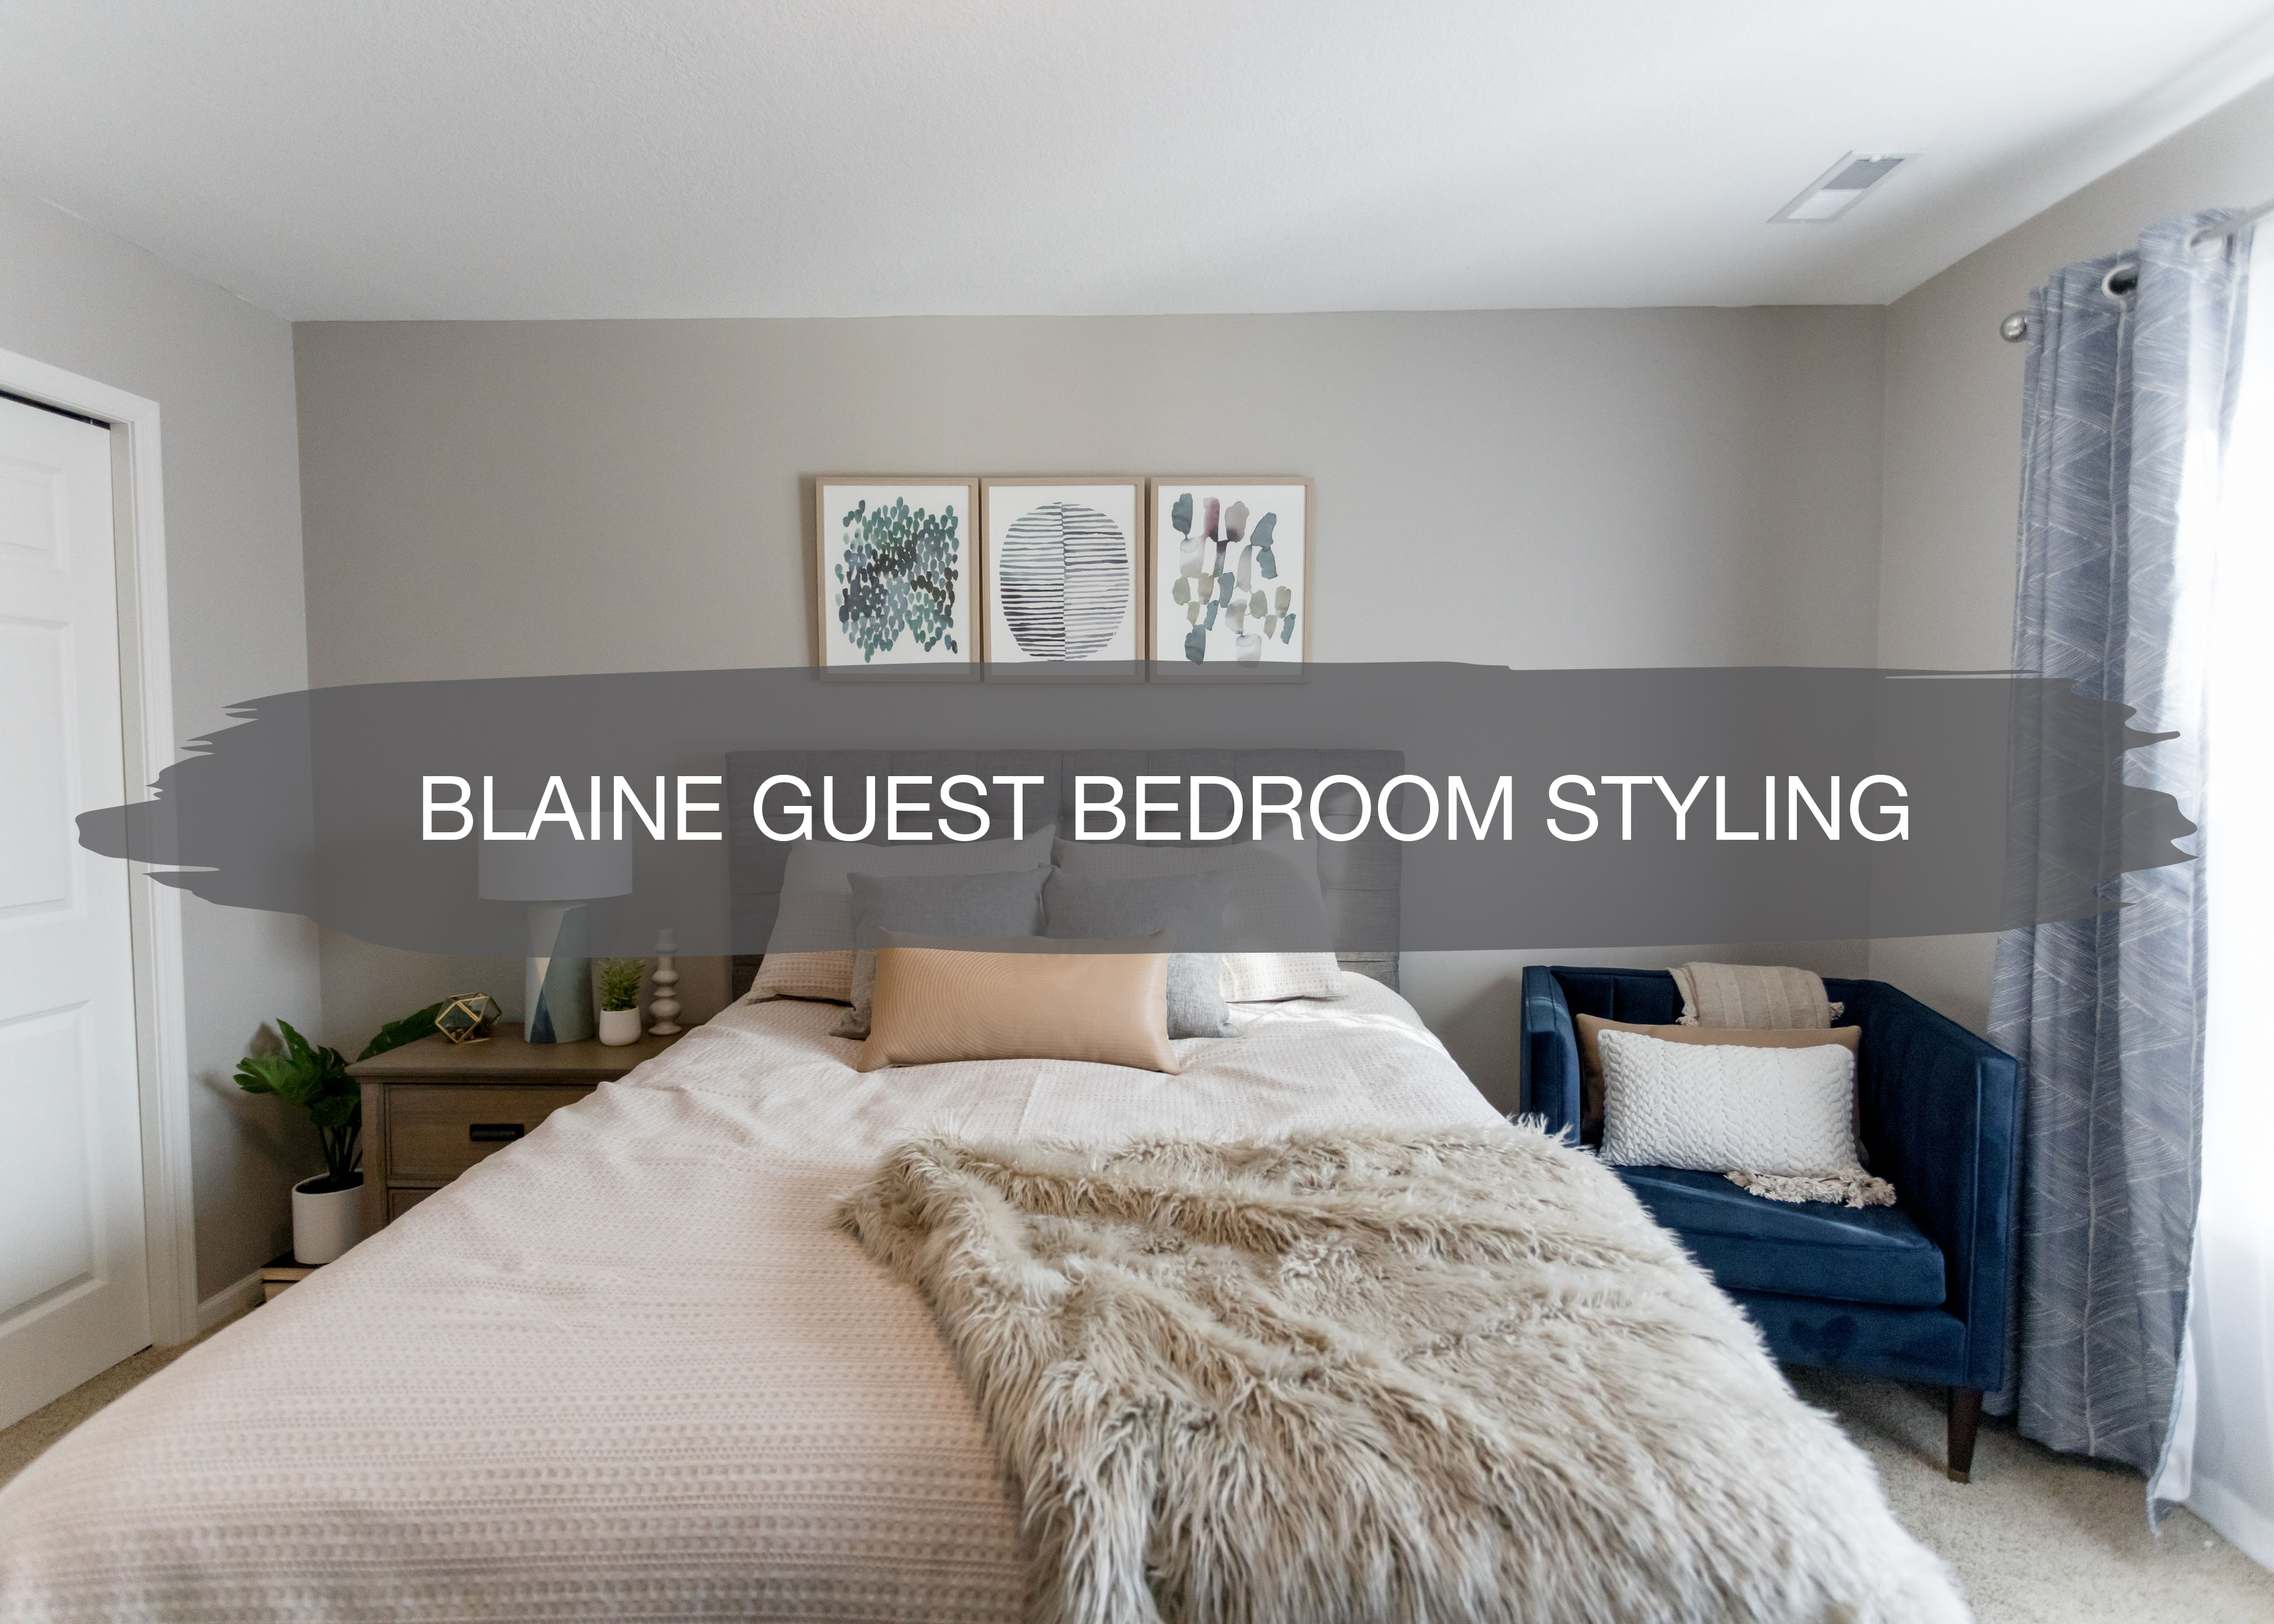 Blaine Guest Bedroom Styling | construction2style